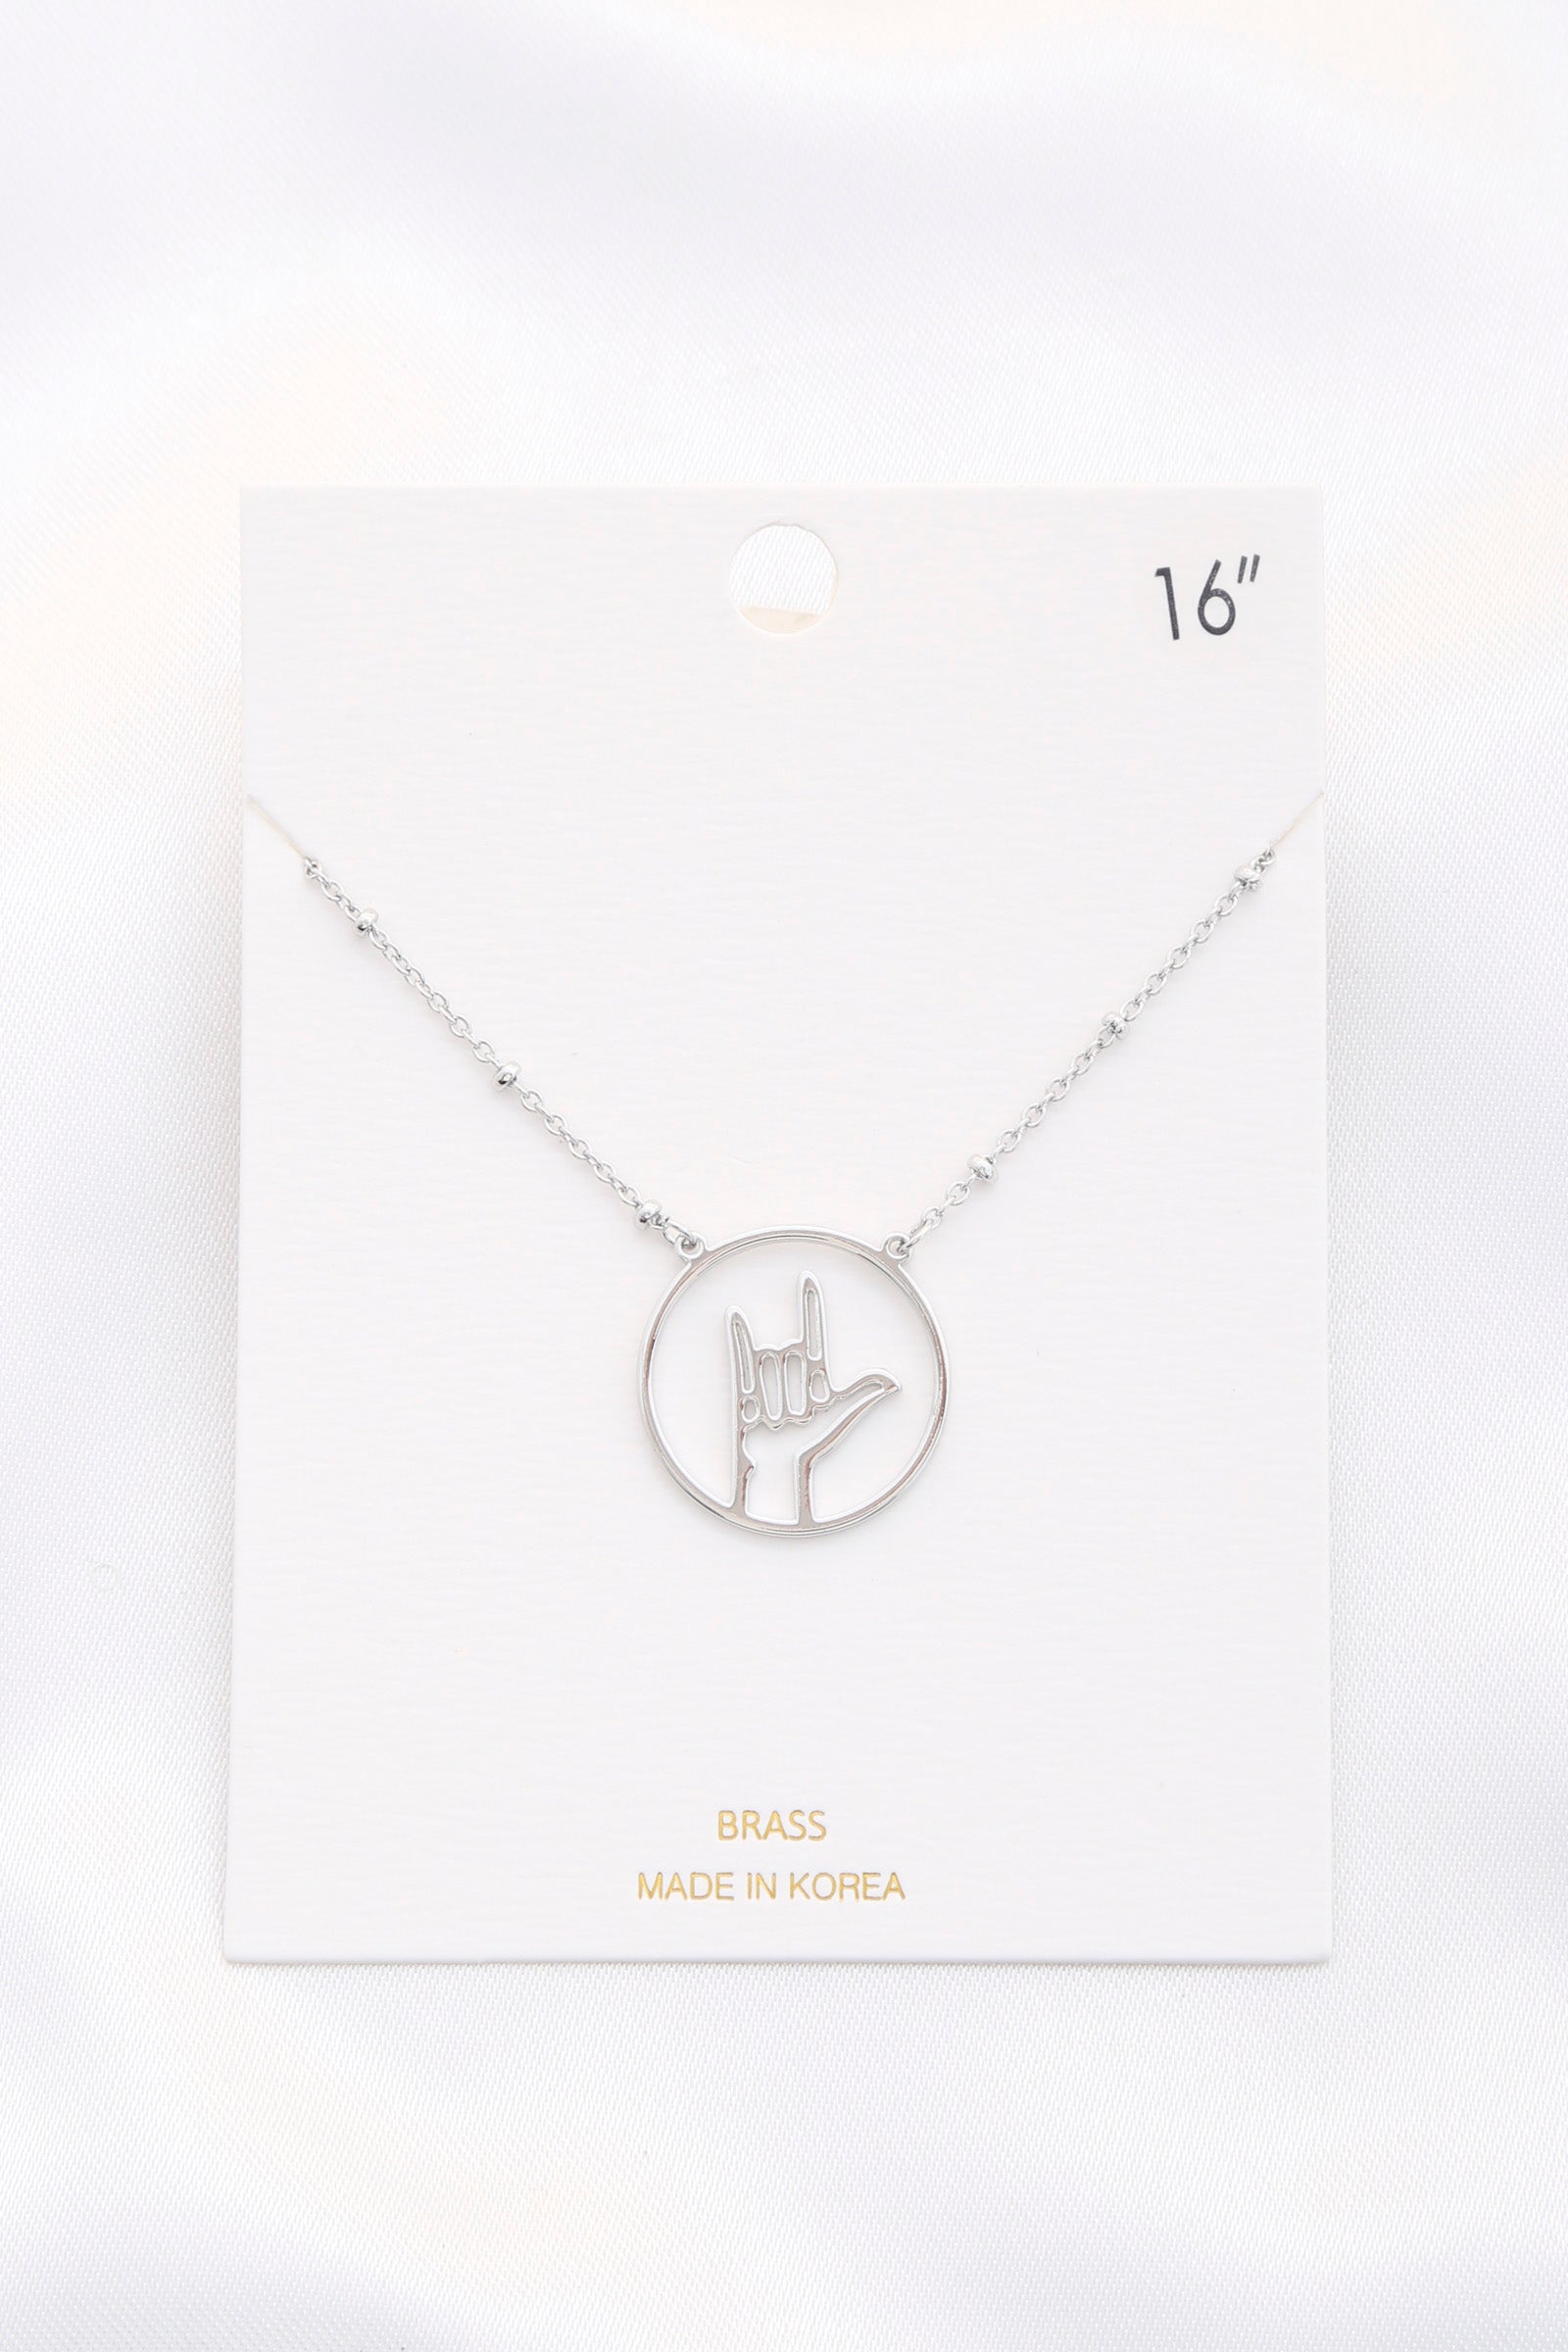 Open Peace Hand Sign Necklace Sunny EvE Fashion